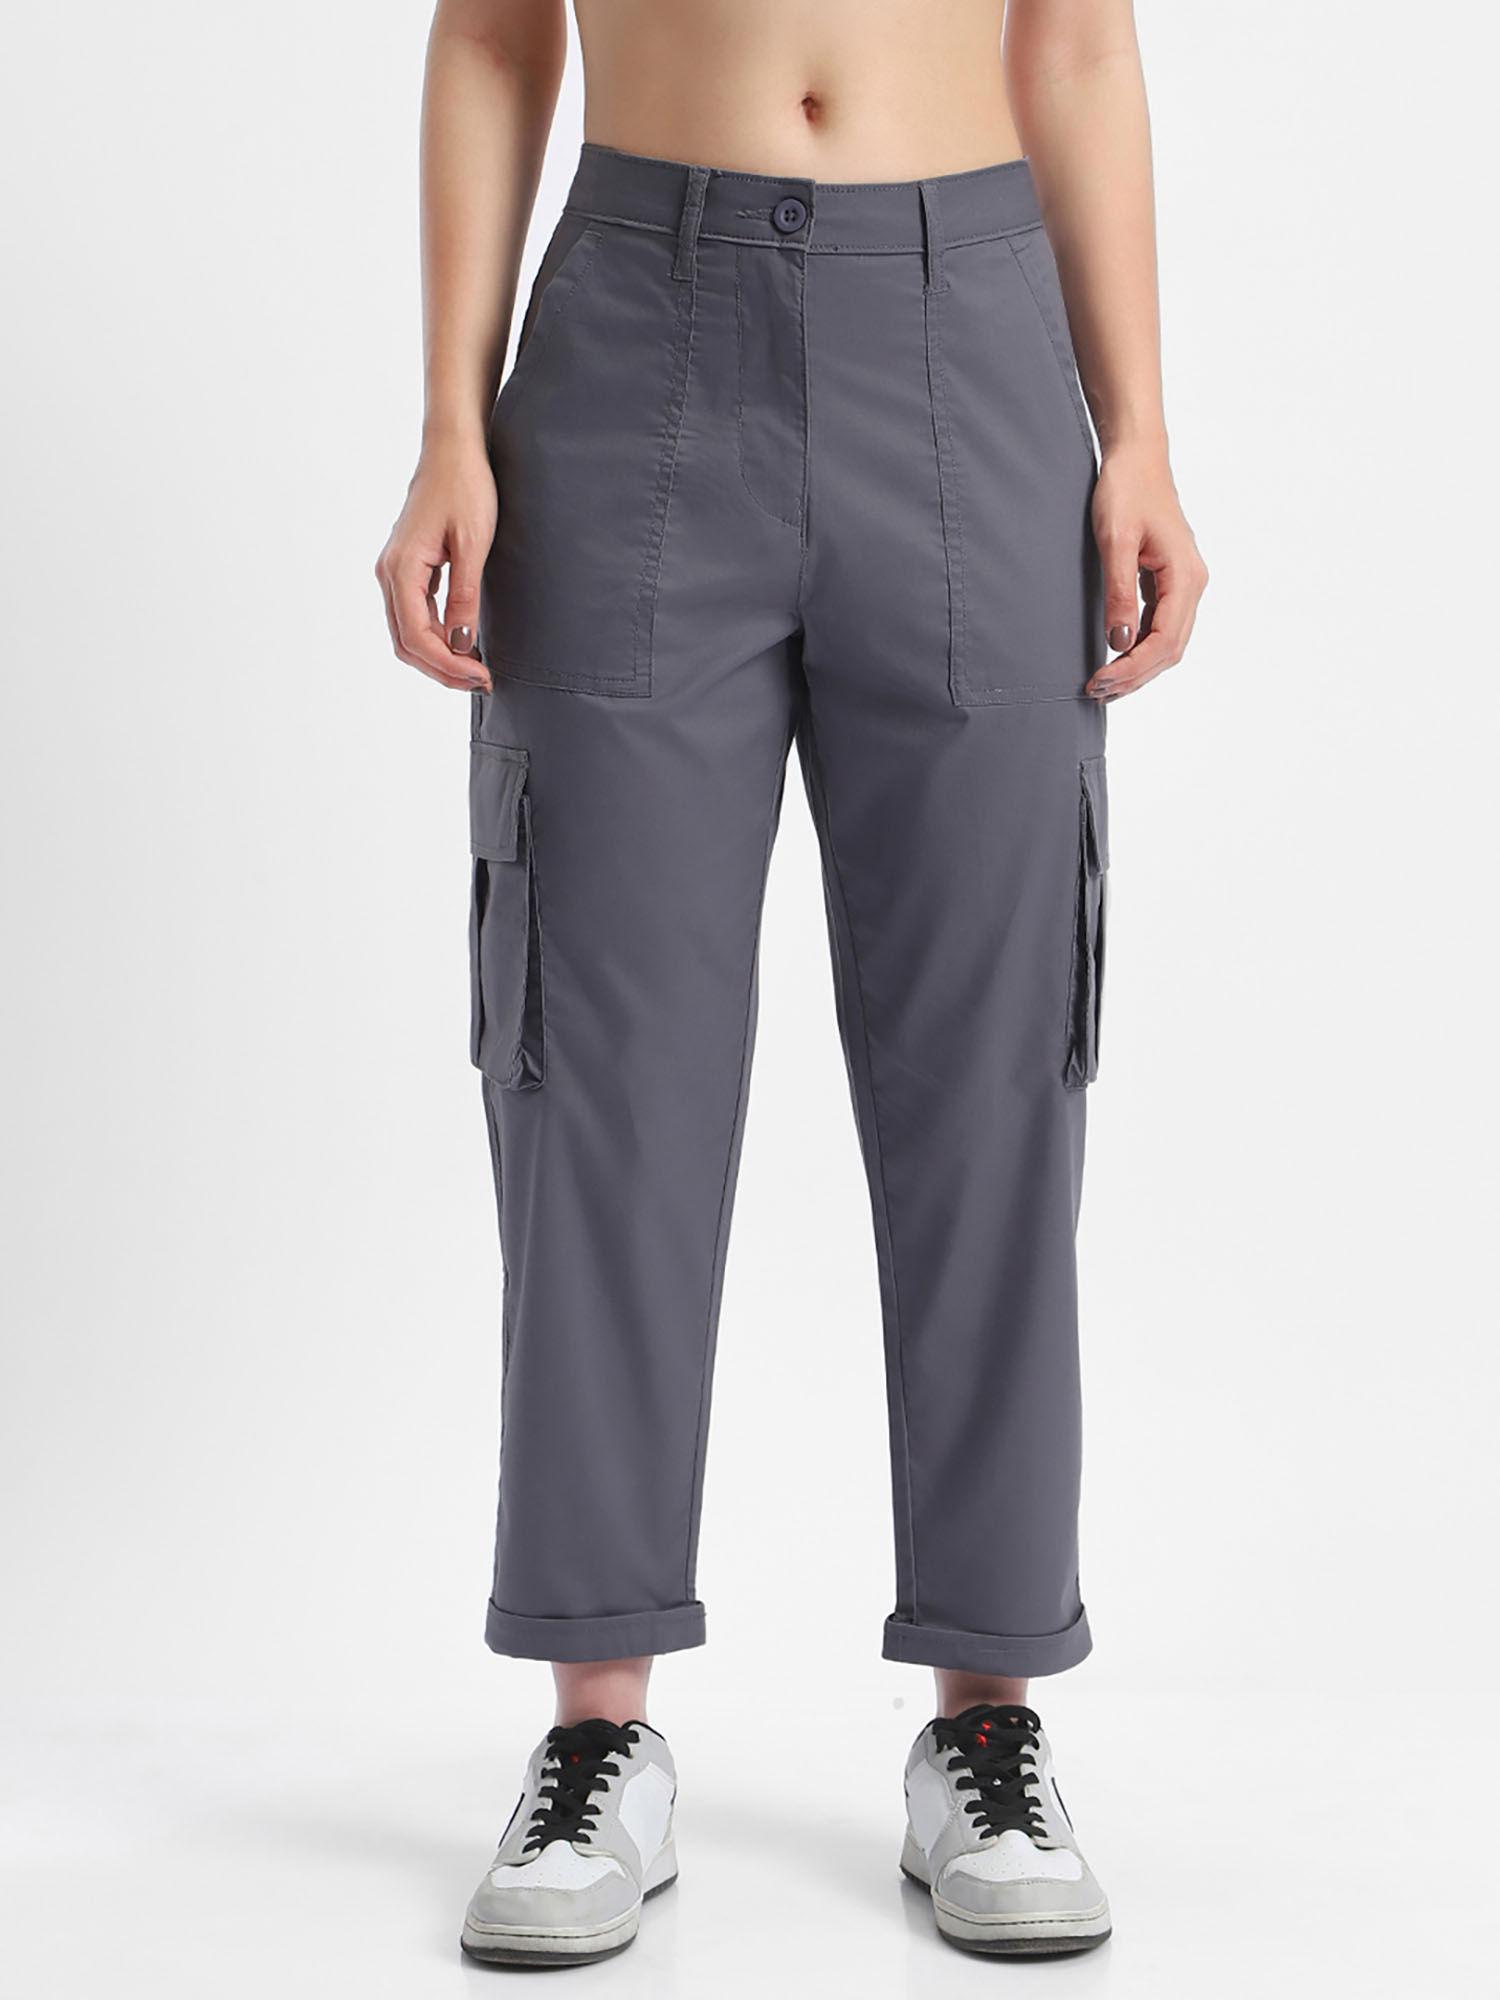 womens grey tapered cargo pants